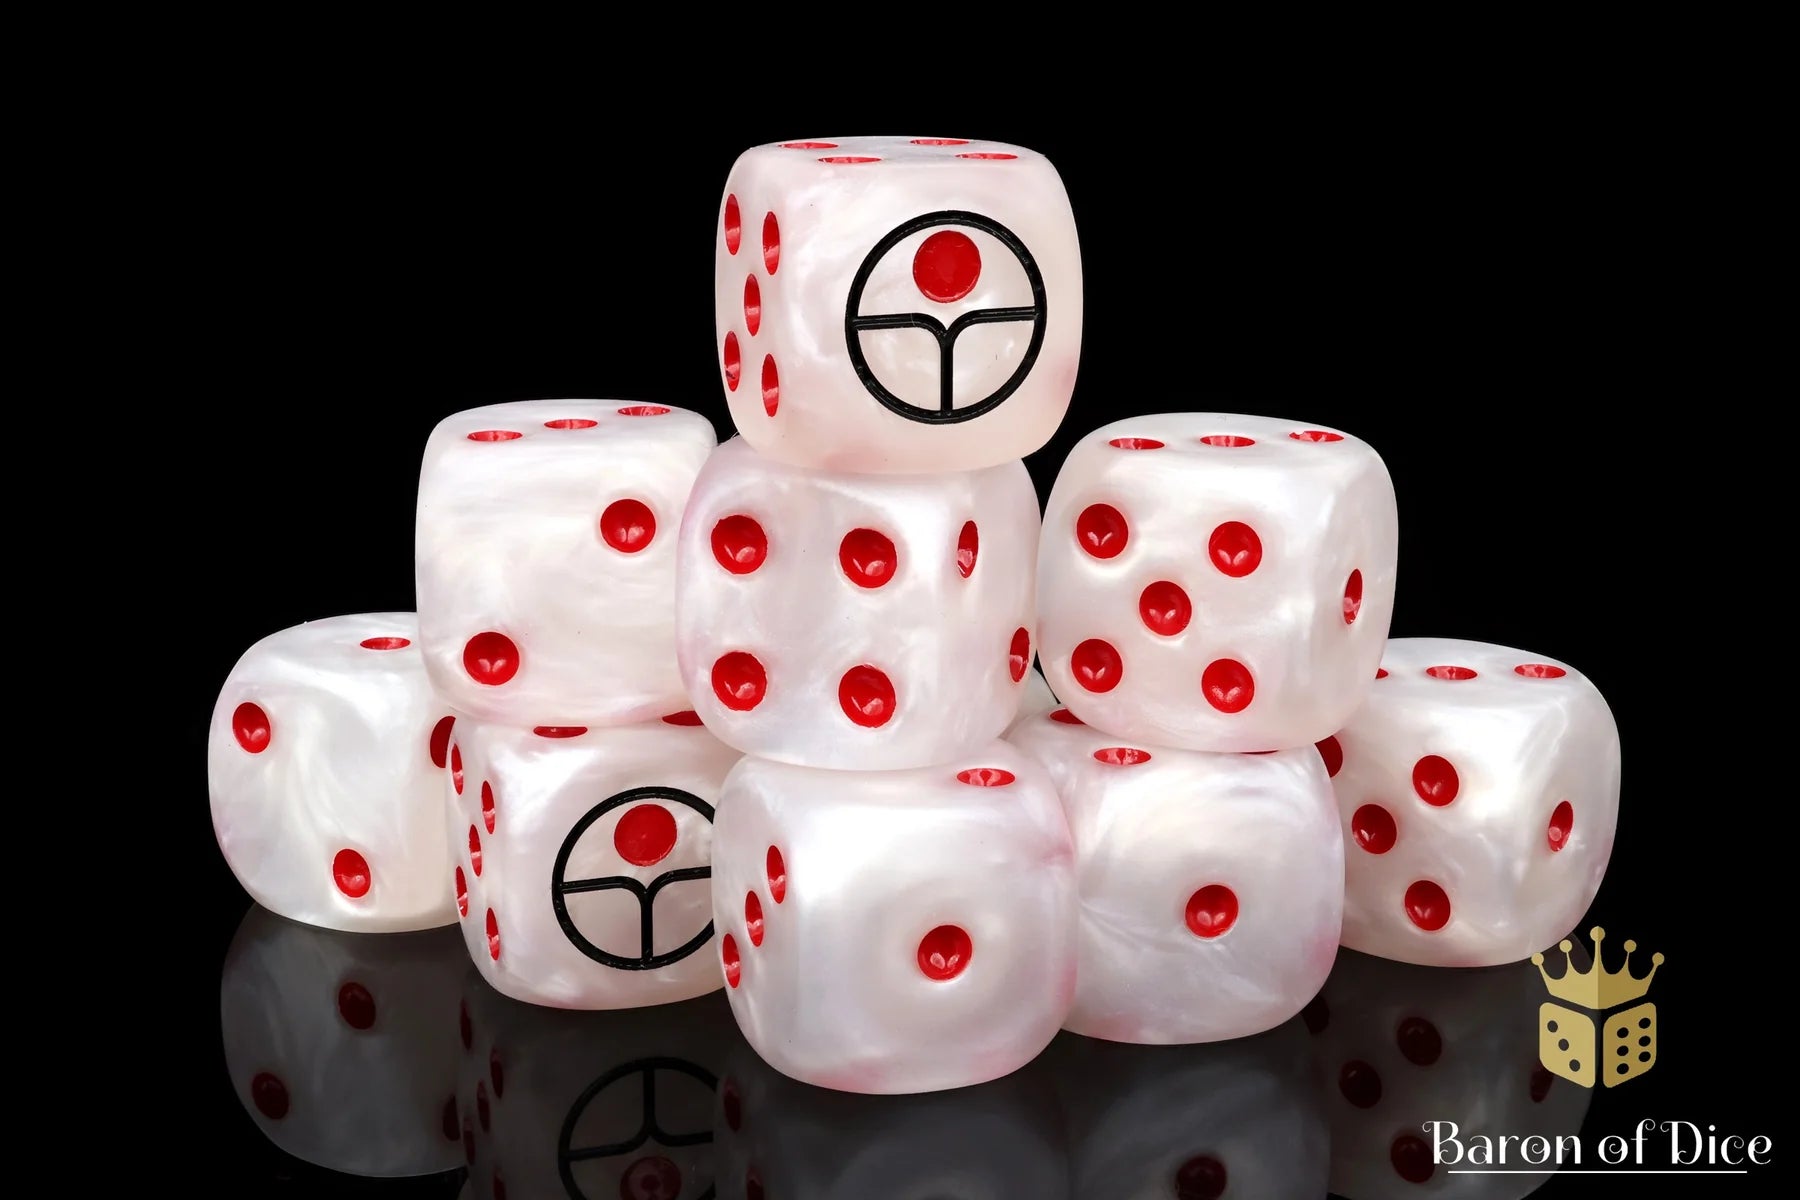 Universal Peace, 25x 16MM Dice, Round Corners | Gopher Games